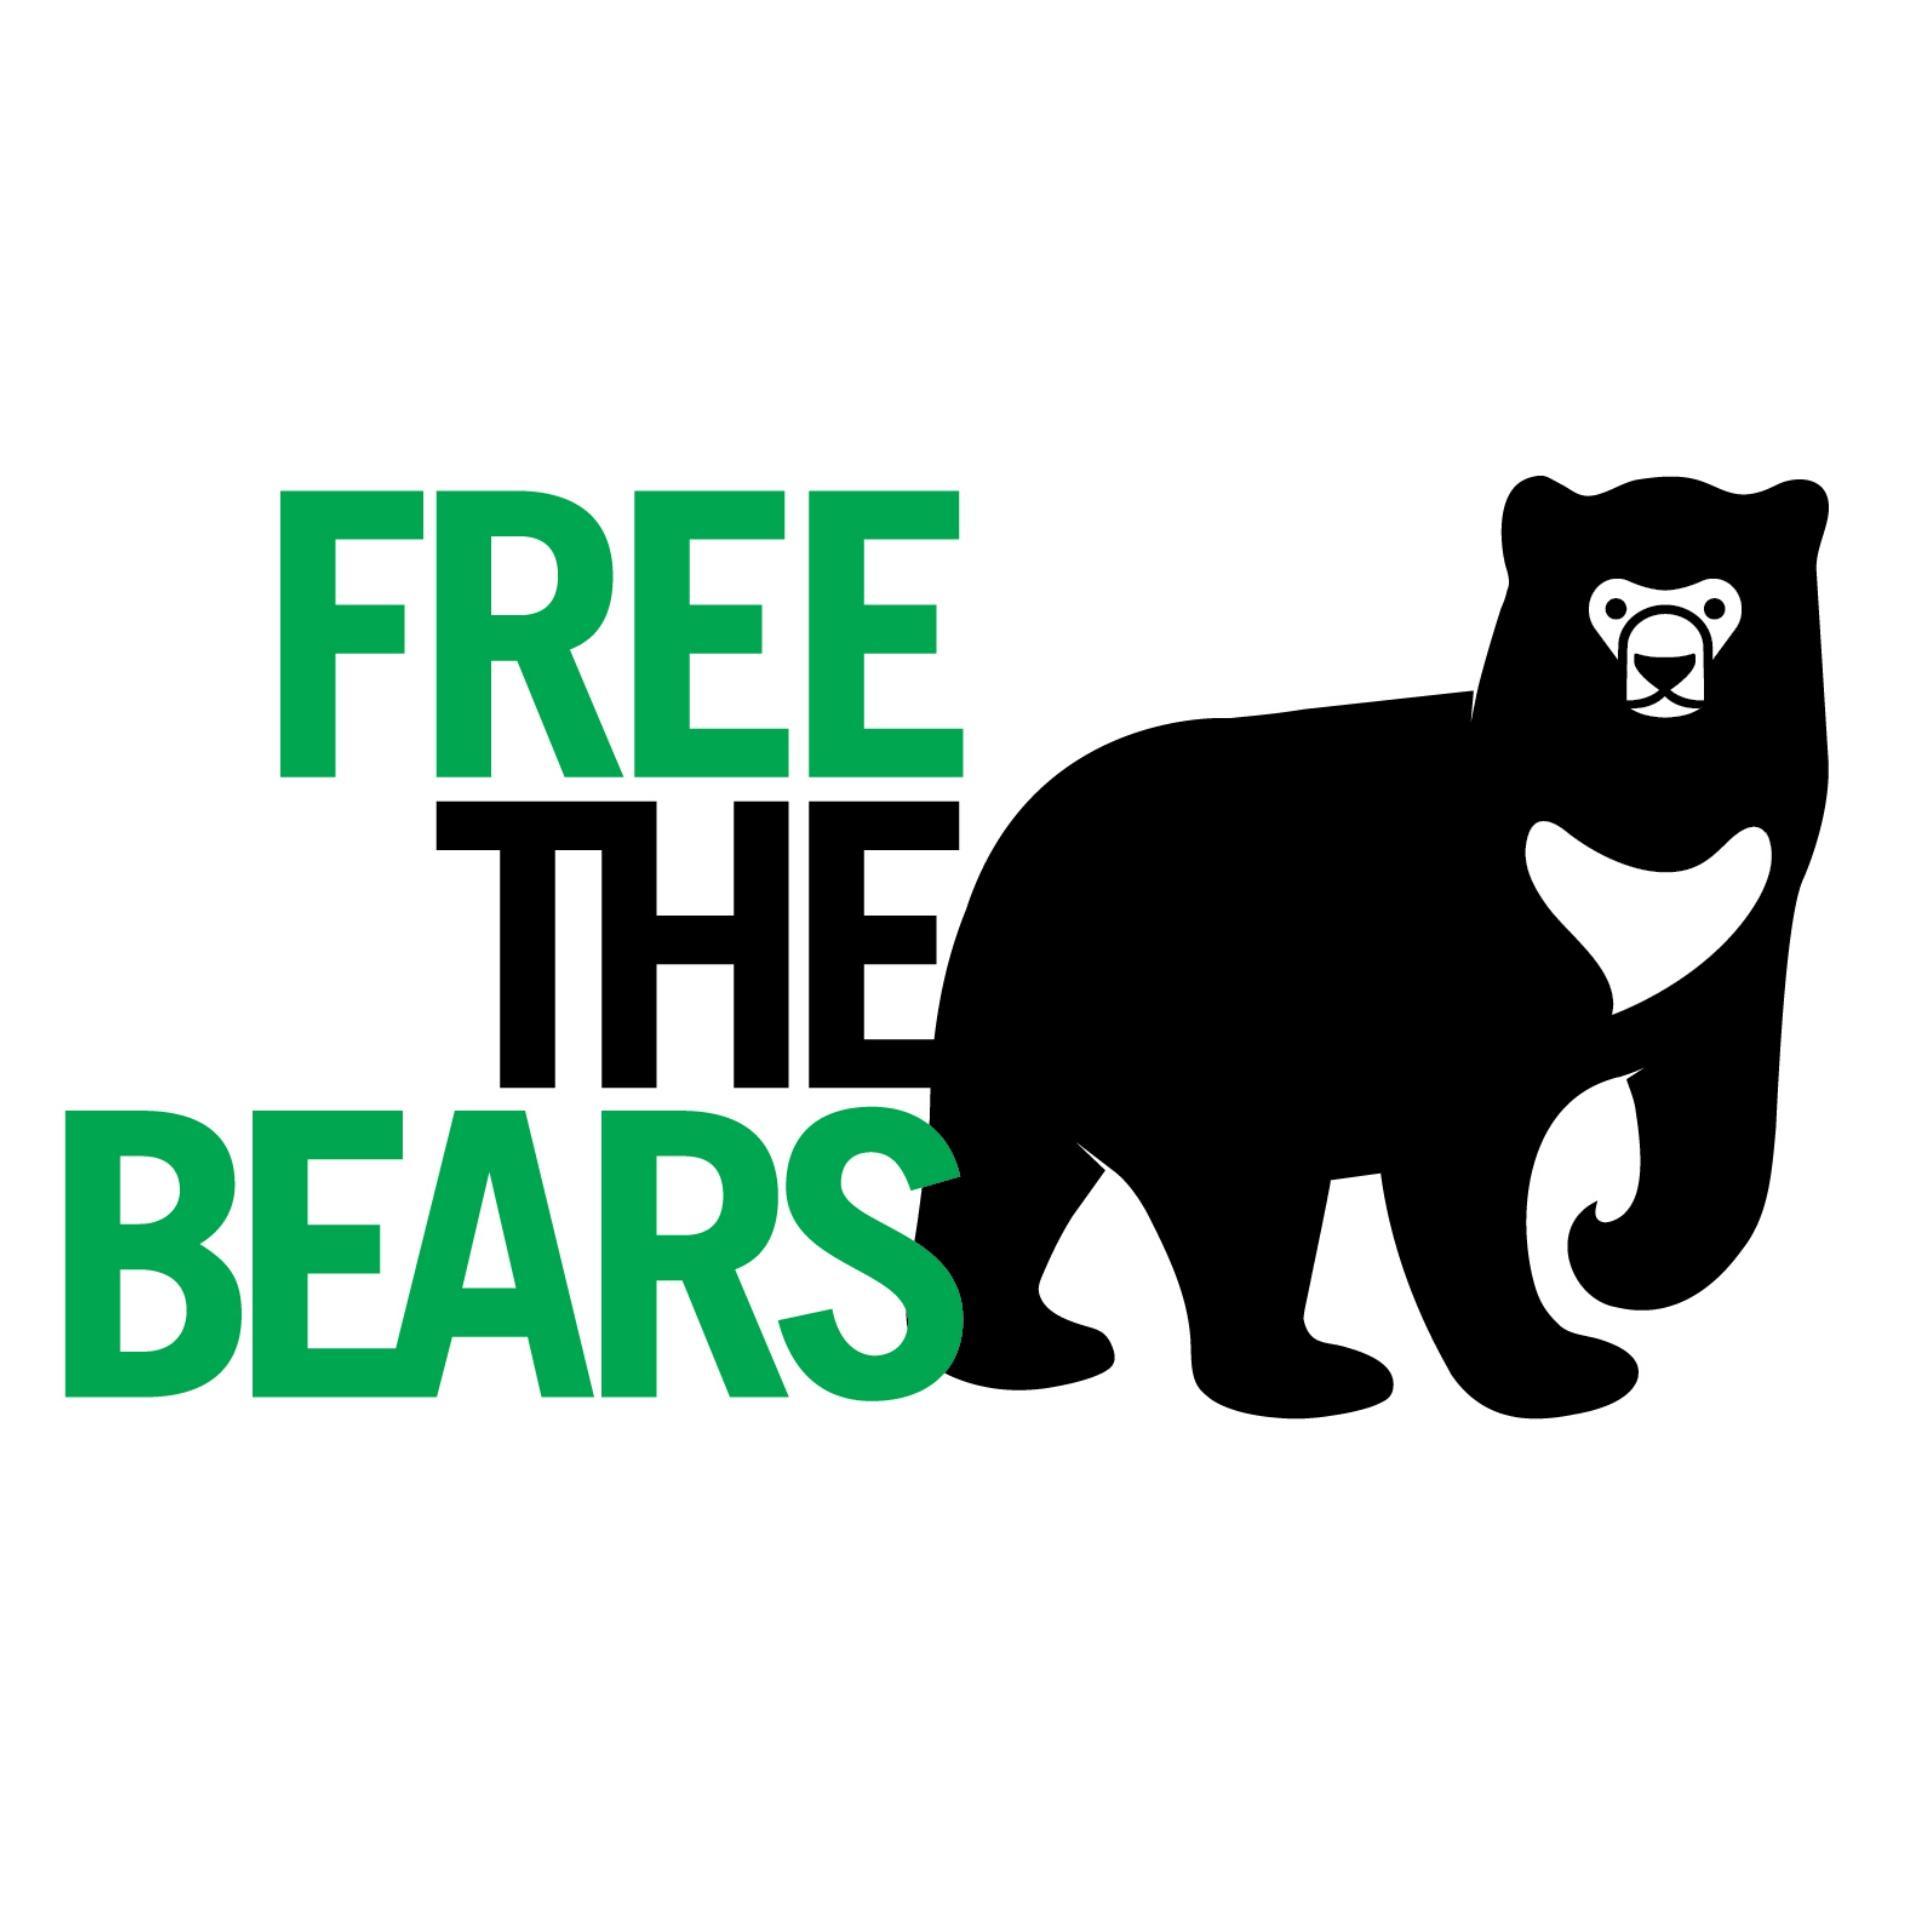 Free The Bears - Of Bears, Transparent background PNG HD thumbnail